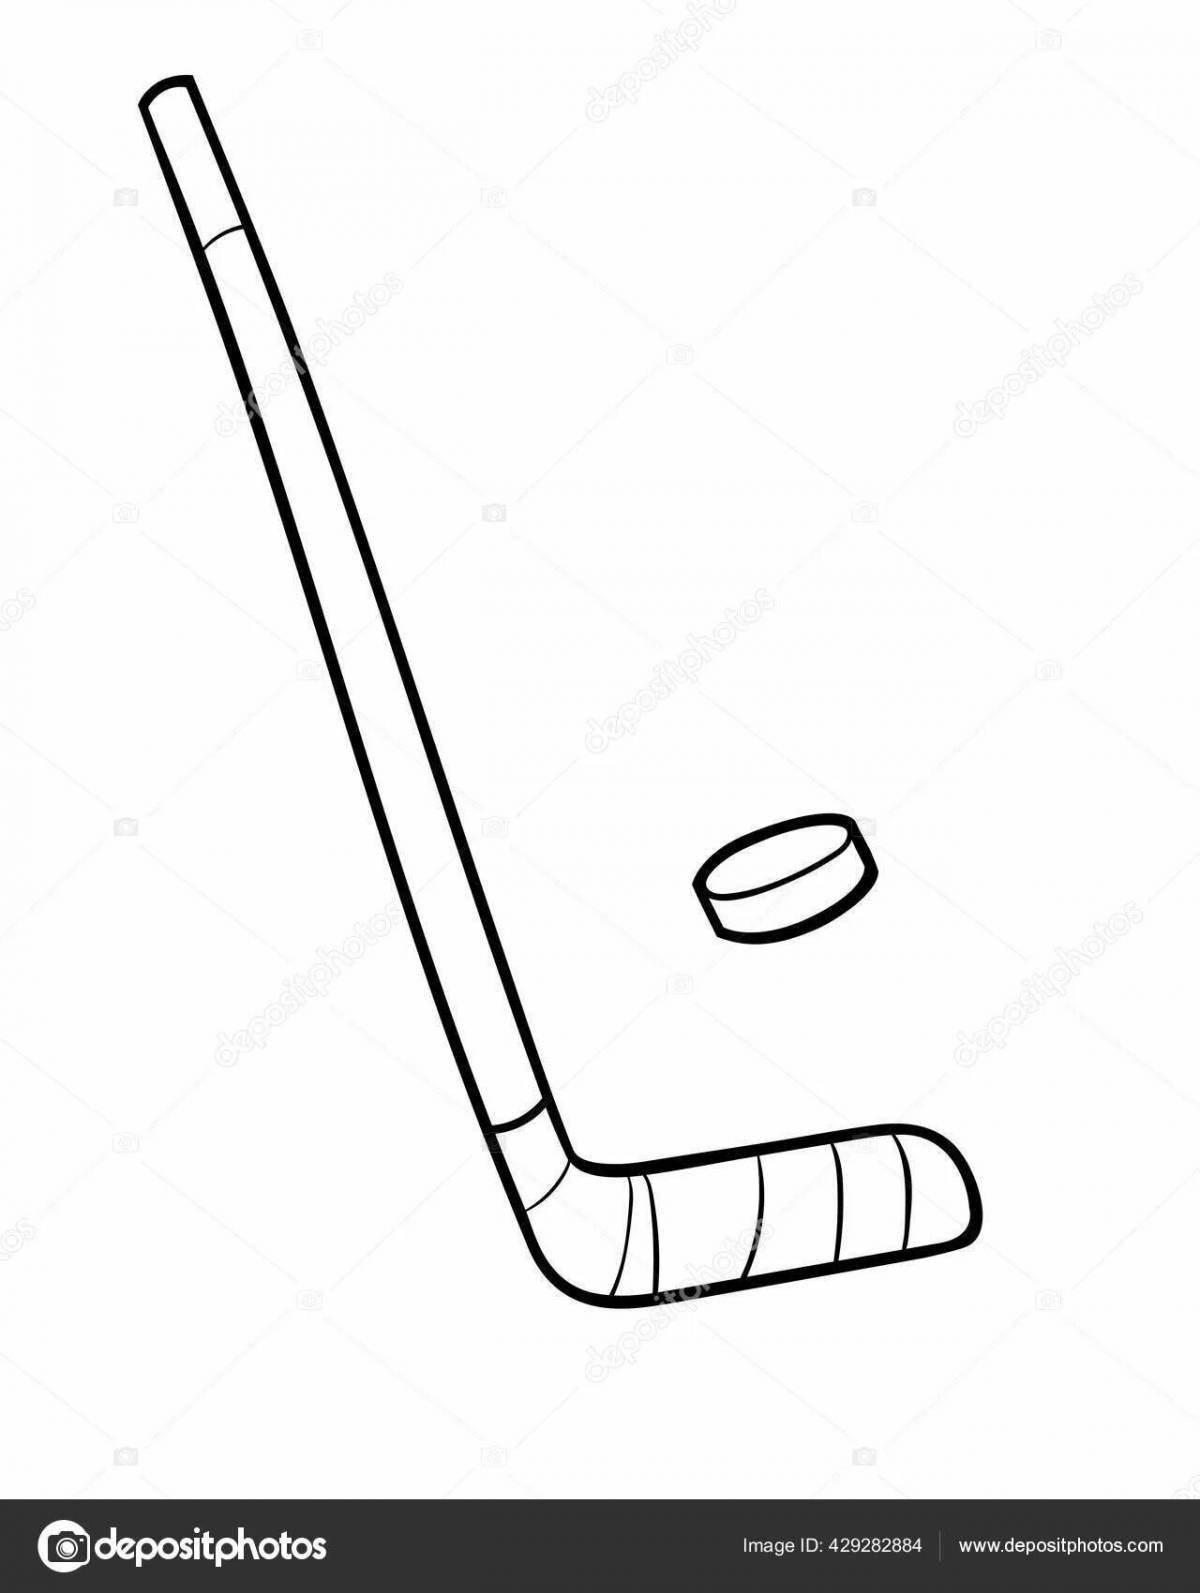 Awesome puck coloring page for kids